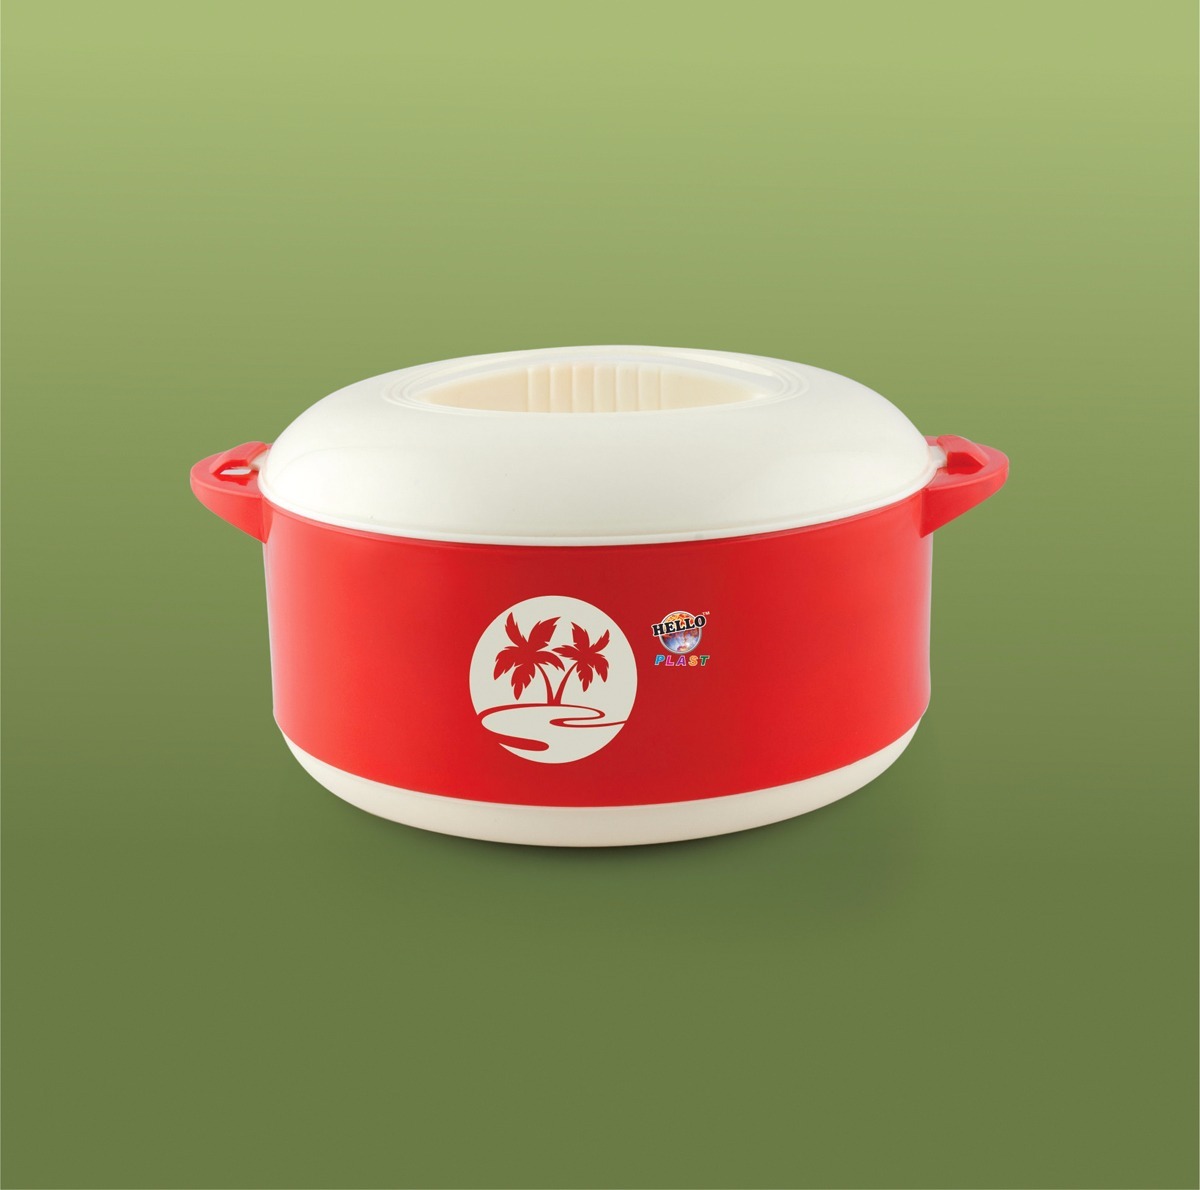 Corporate Gift Insulated Hot Pot